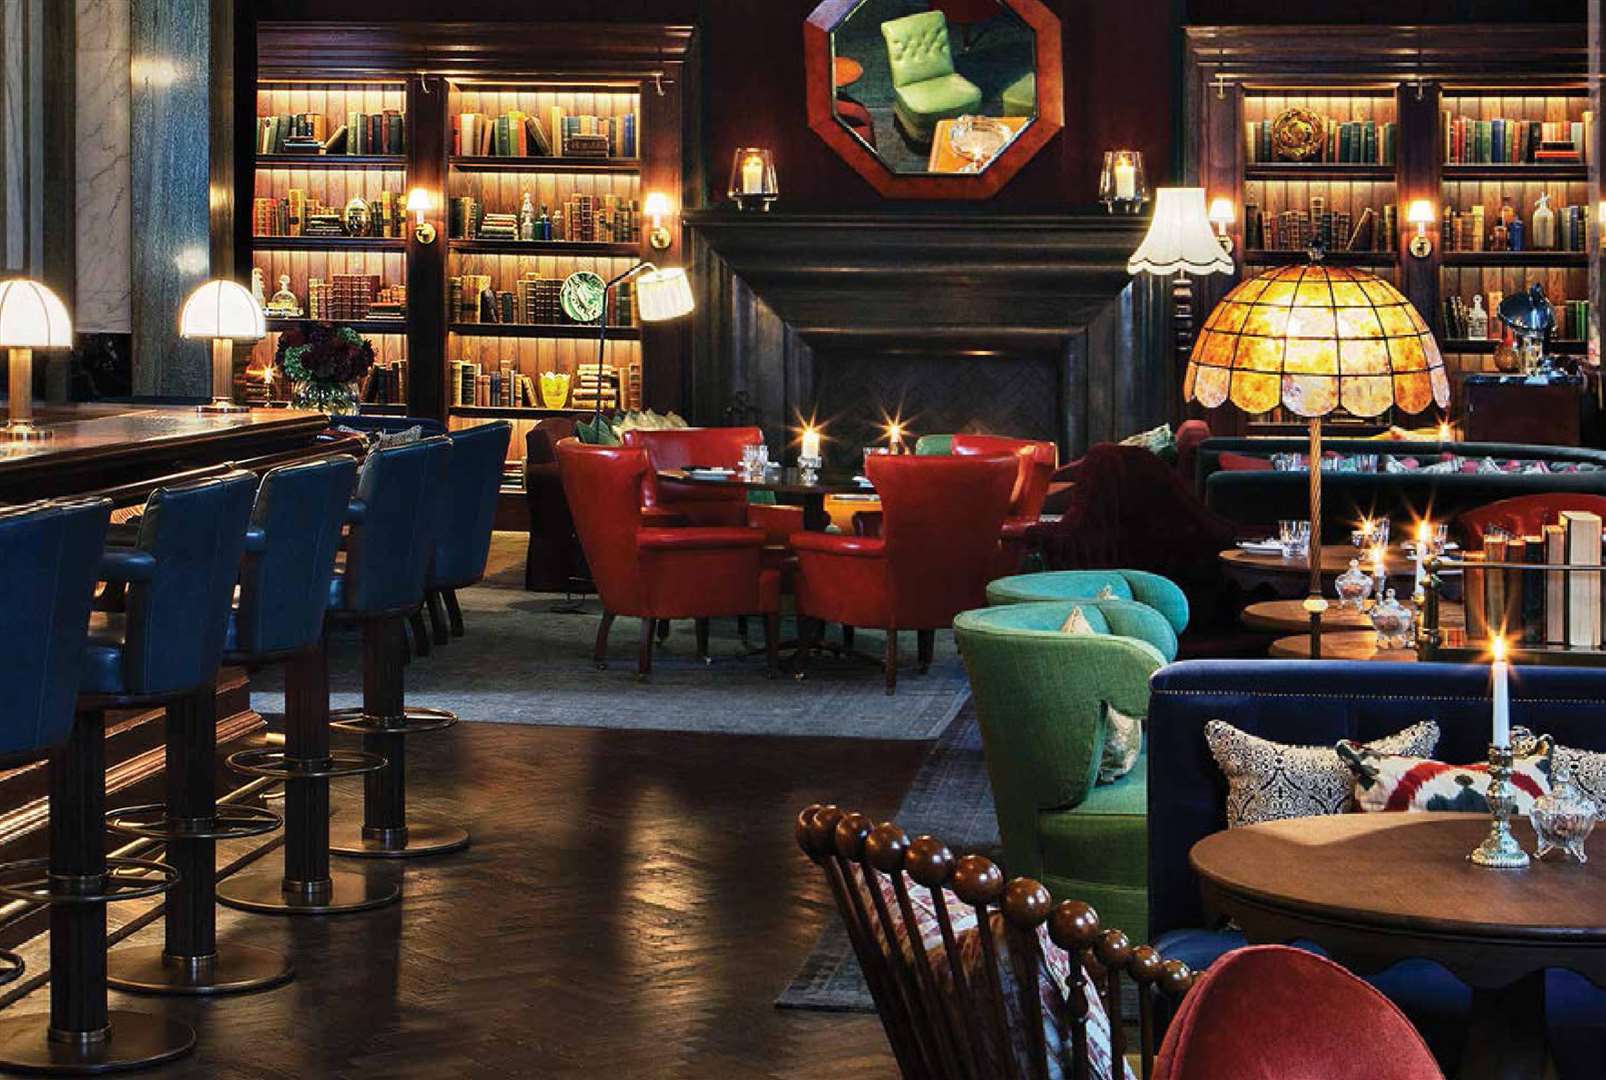 How the interior of the proposed hotel would have looked